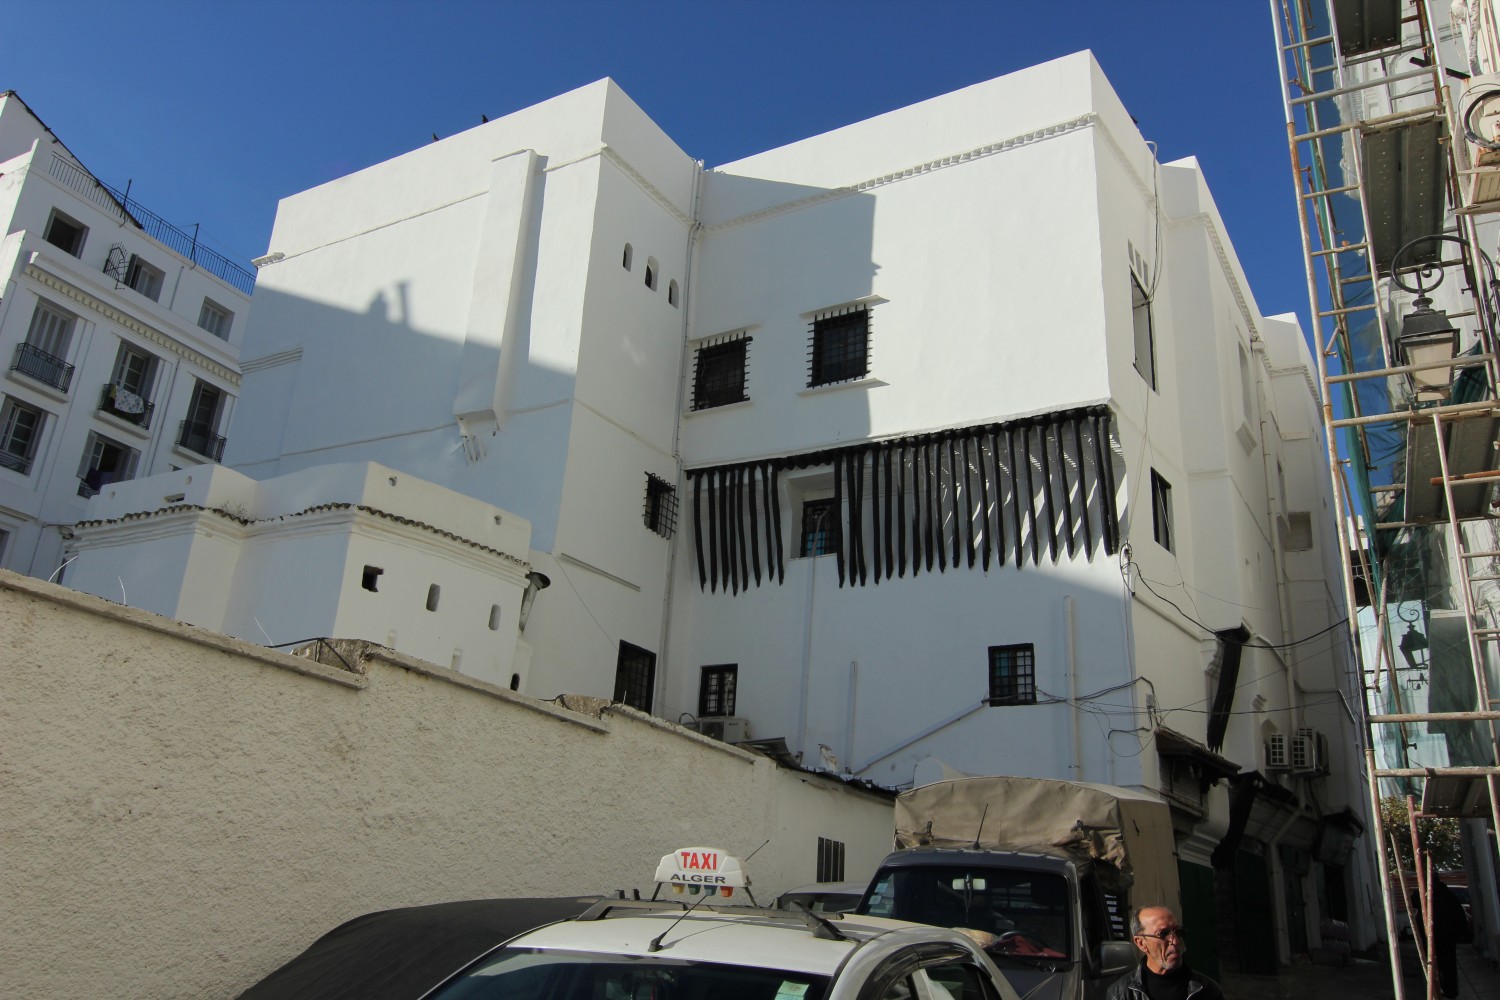 Rue Ben Ferhat, exterior view of Dar Aziza's east facade showing wood brackets, corbellings, dog-tooth cornices, and small windows with security bars